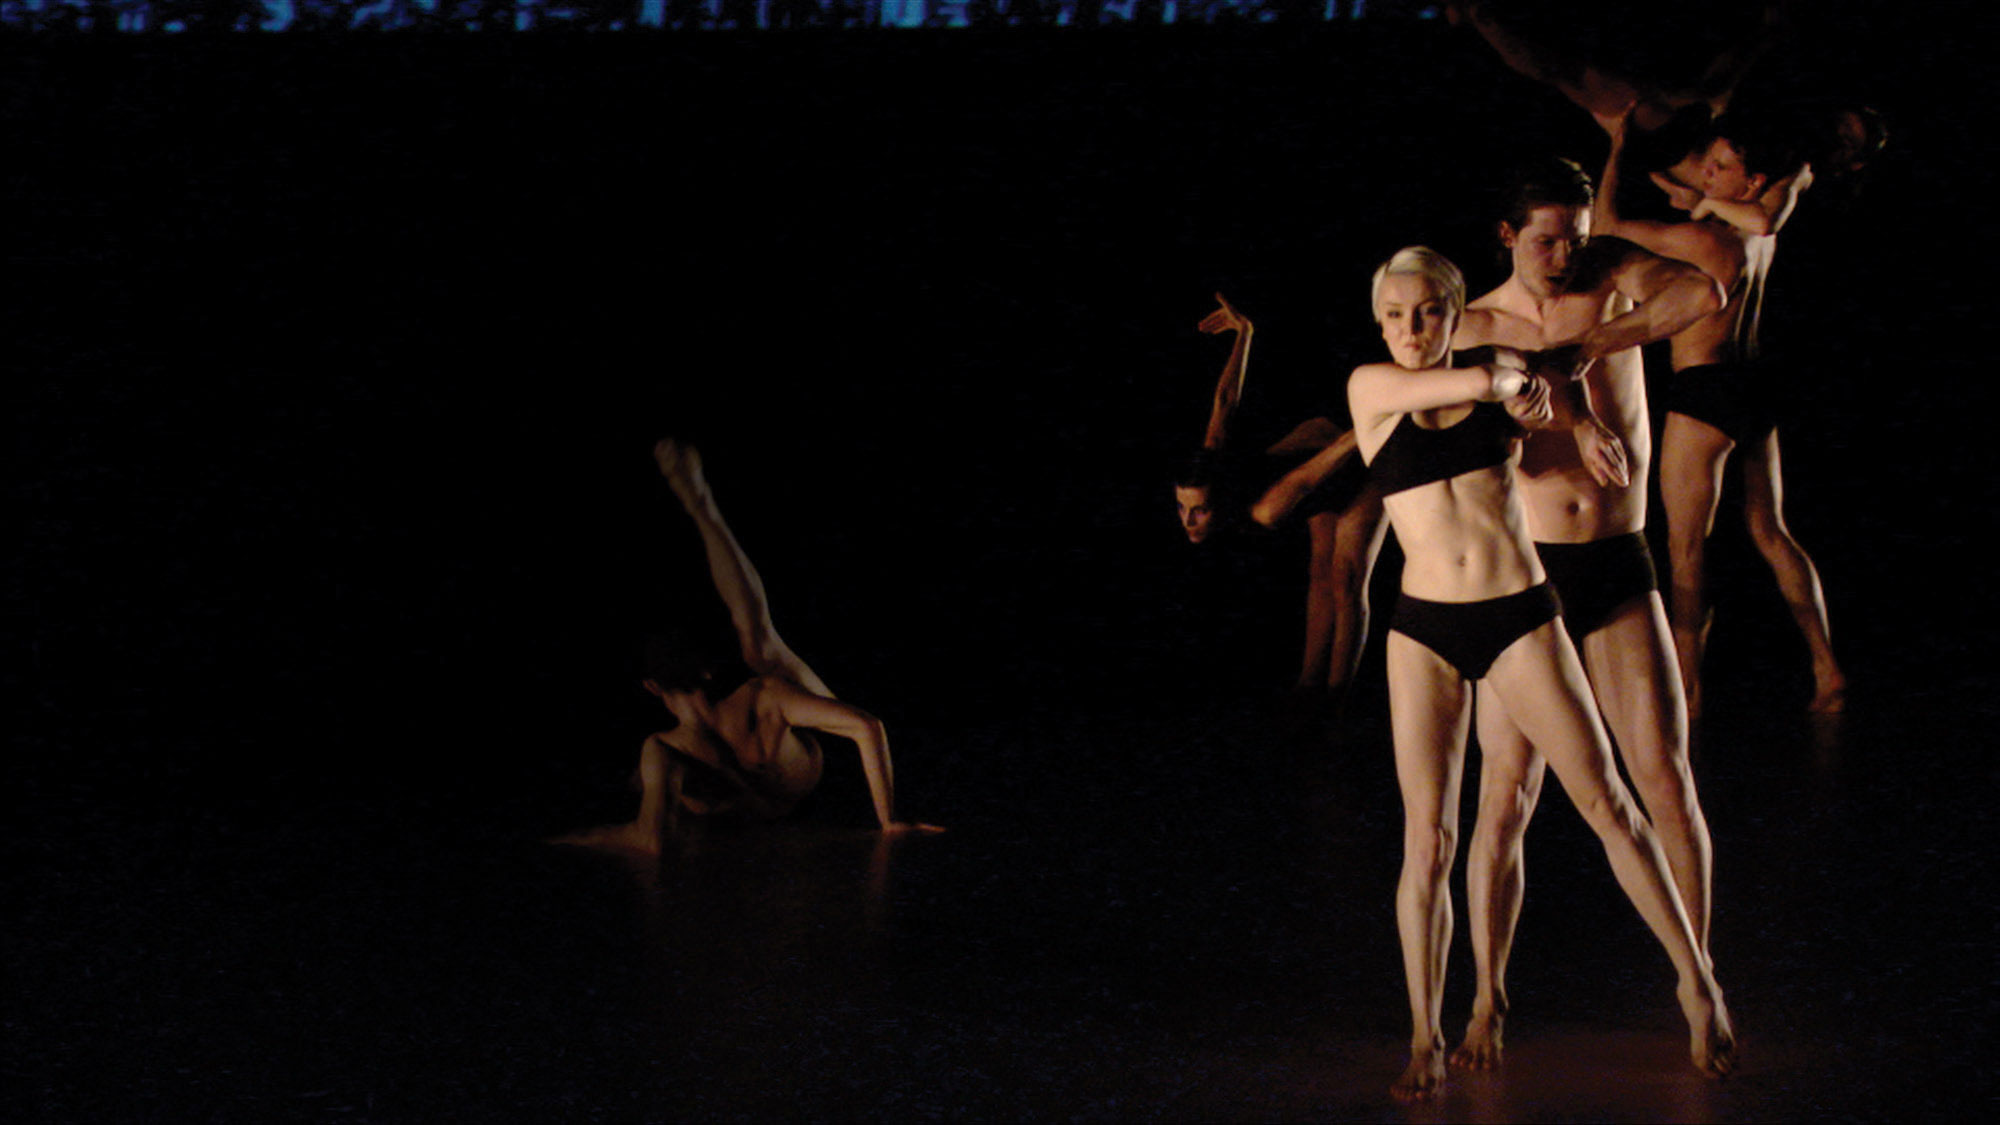 Six white dancers on dark stage dressed only in black underwear. Each person is in there own unique pose, including an individual on the floor with their leg extended and a woman standing in the front with arms twisted. 